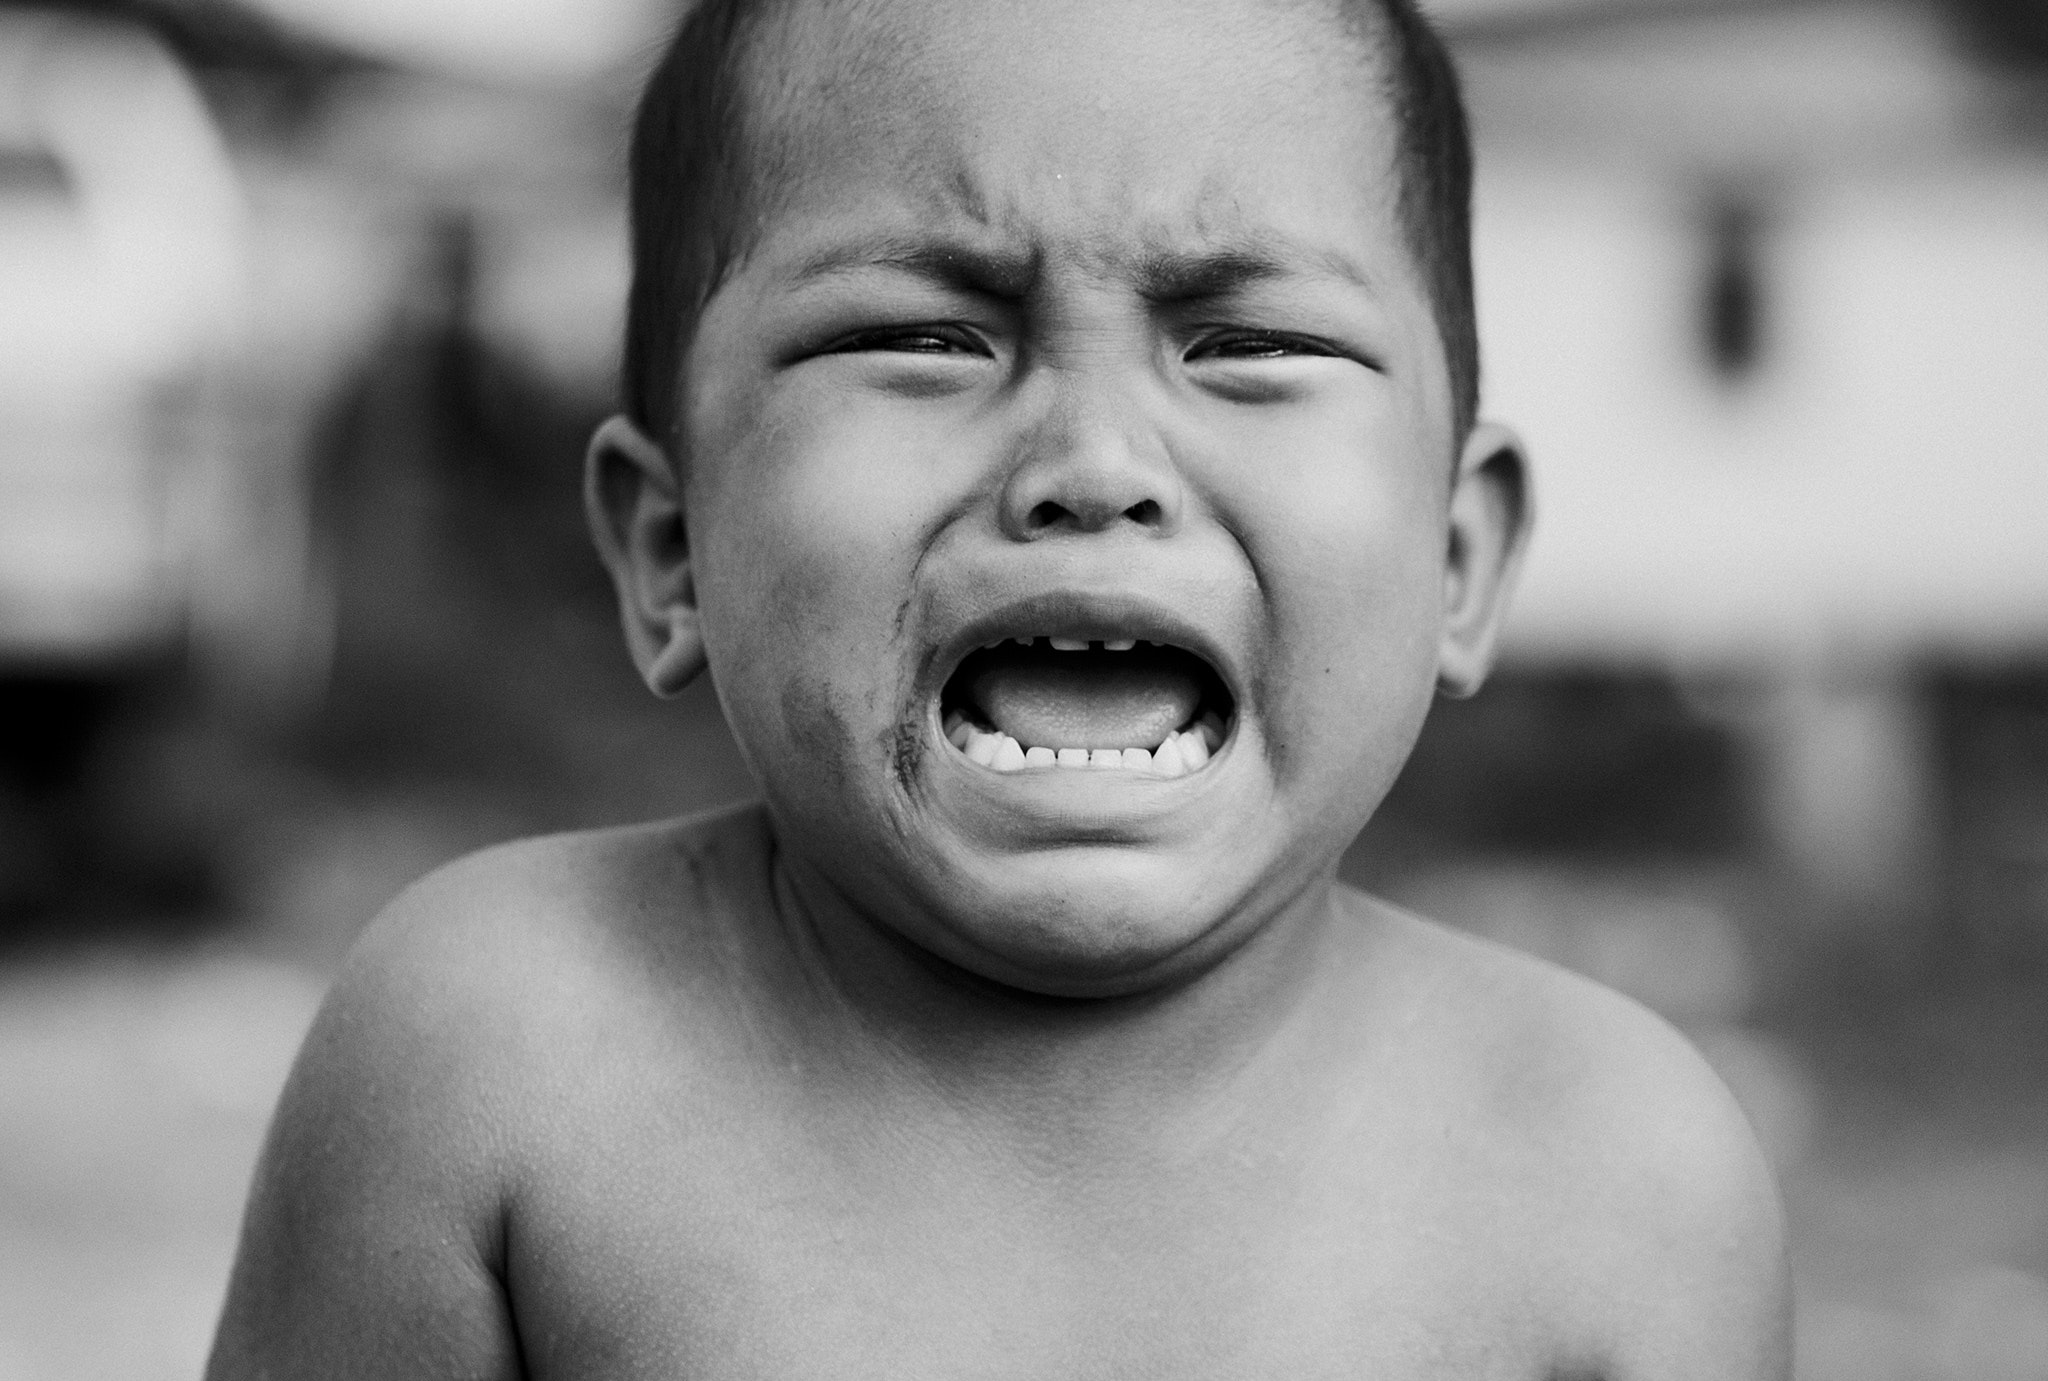 Gray scale photo of crying topless boy